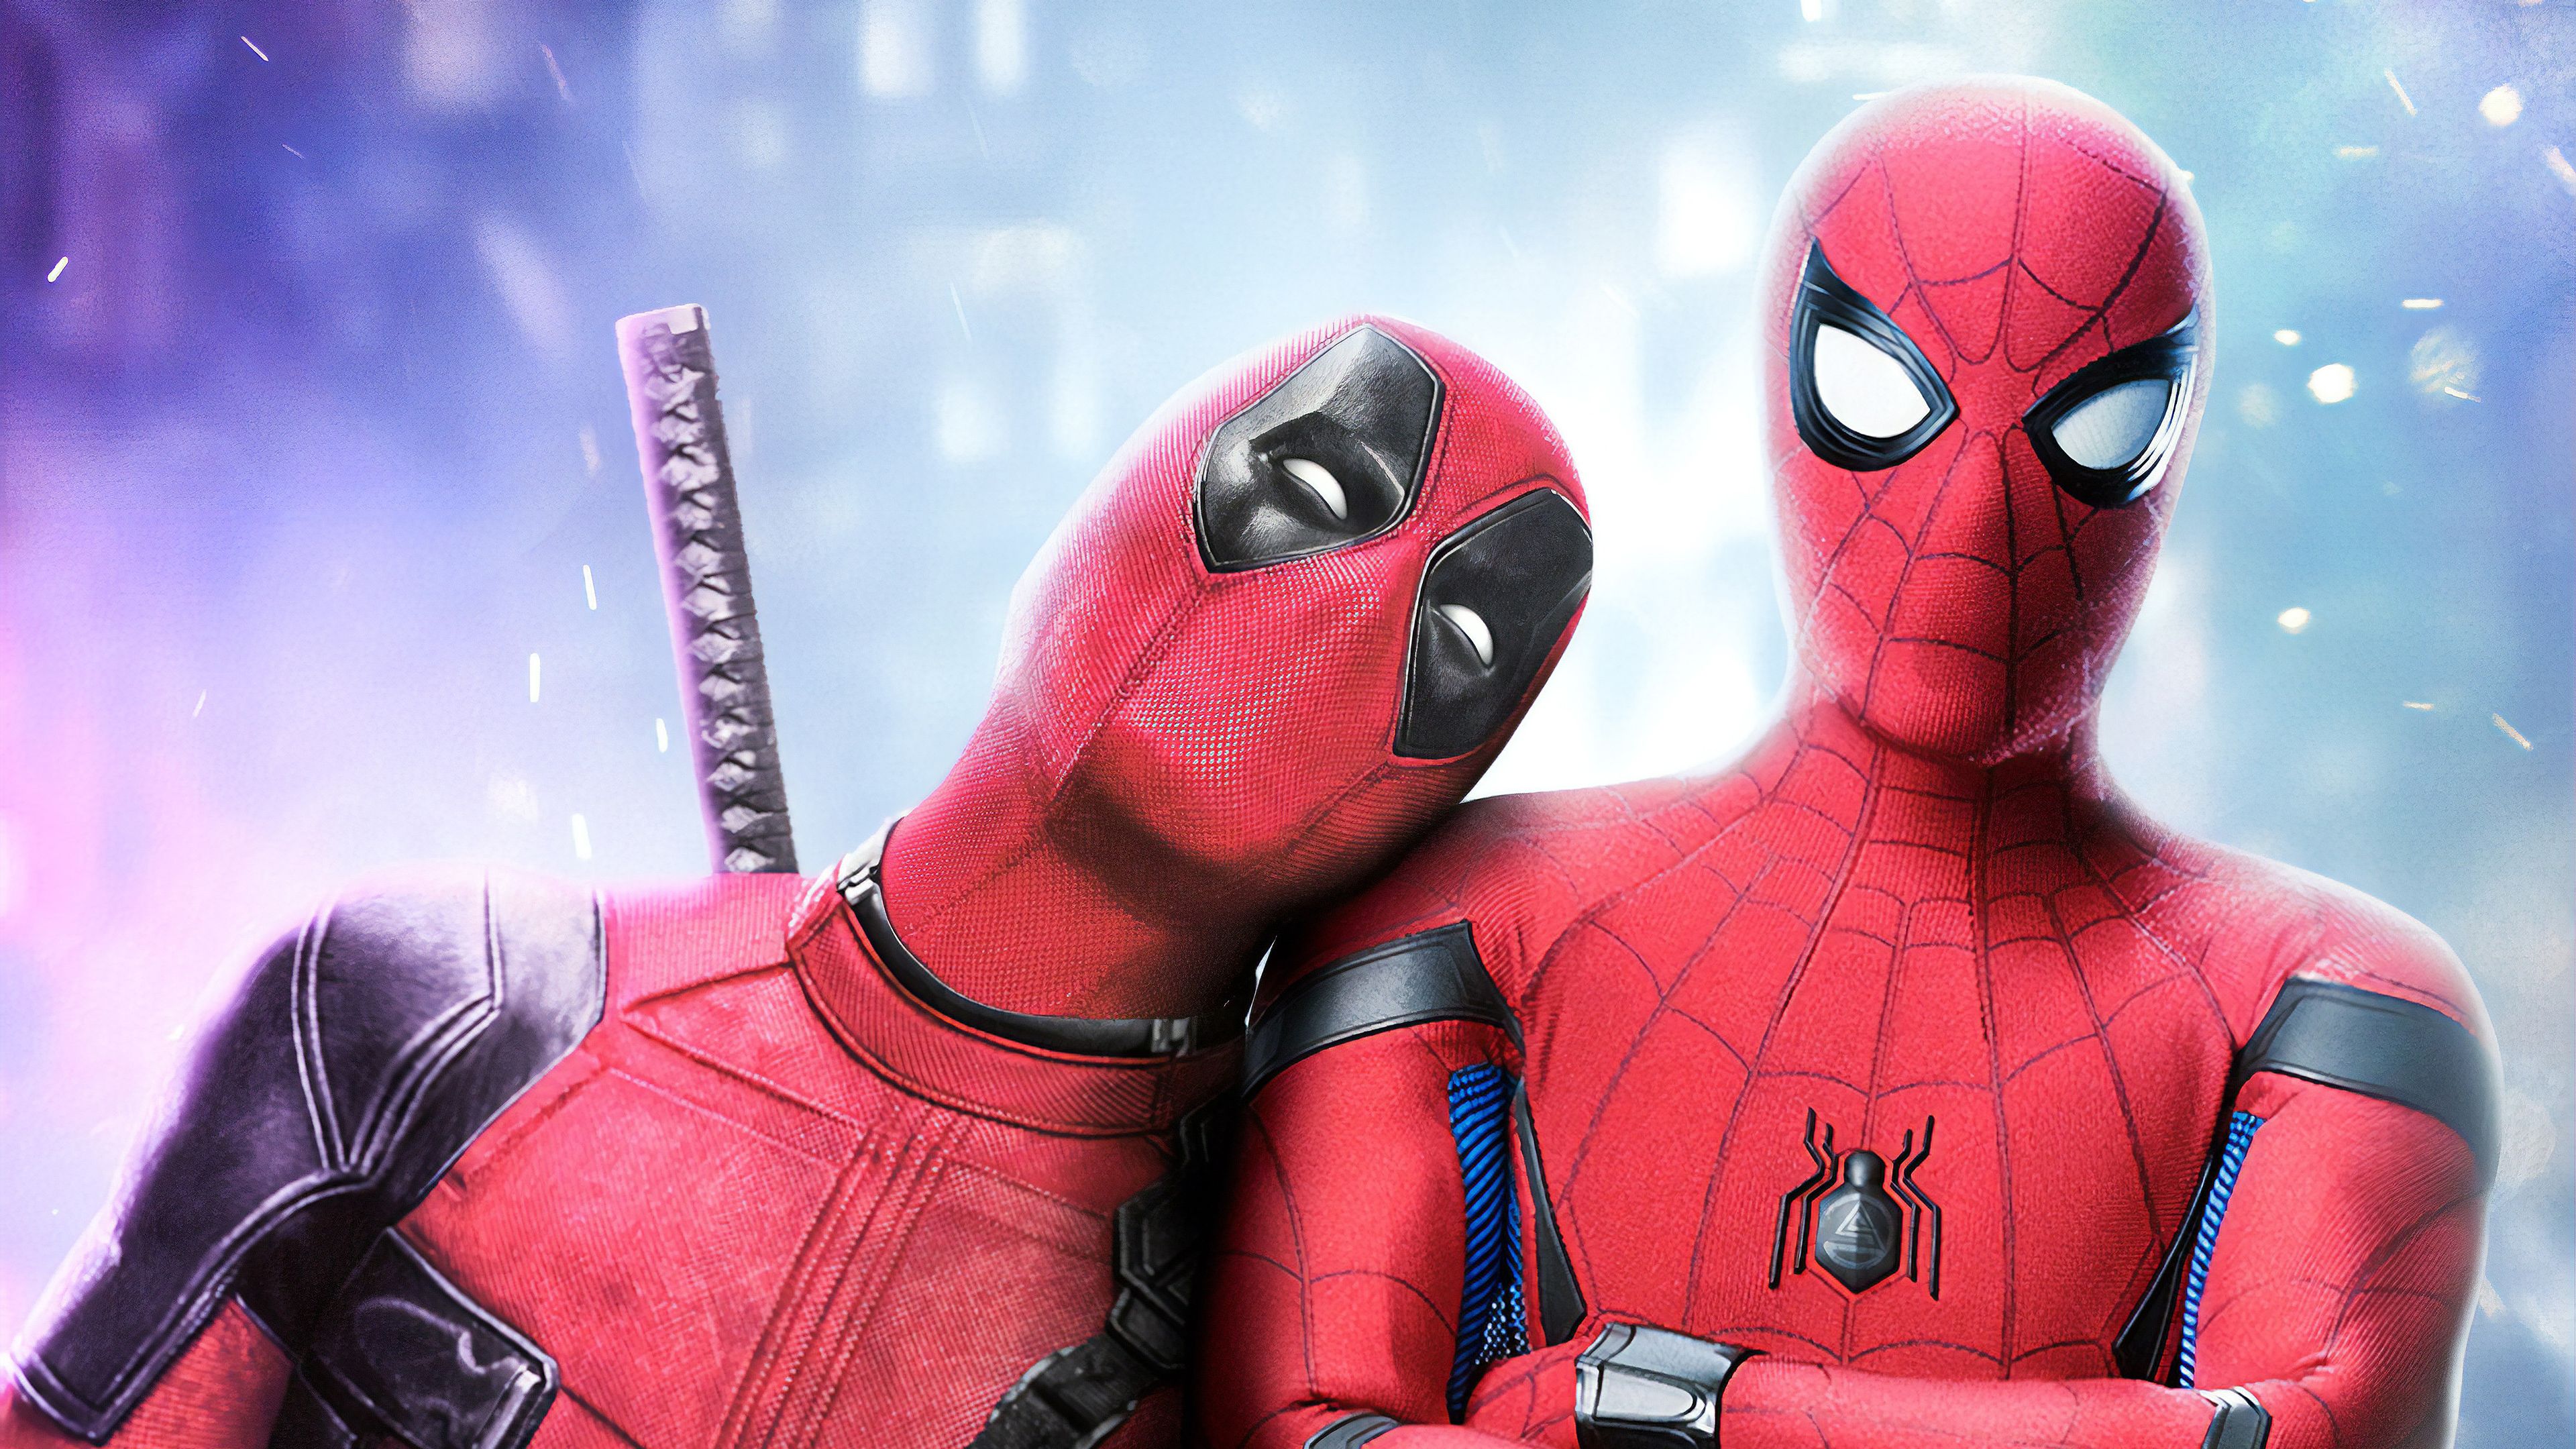 Deadpool And Spiderman Art, HD Superheroes, 4k Wallpaper, Image, Background, Photo and Picture